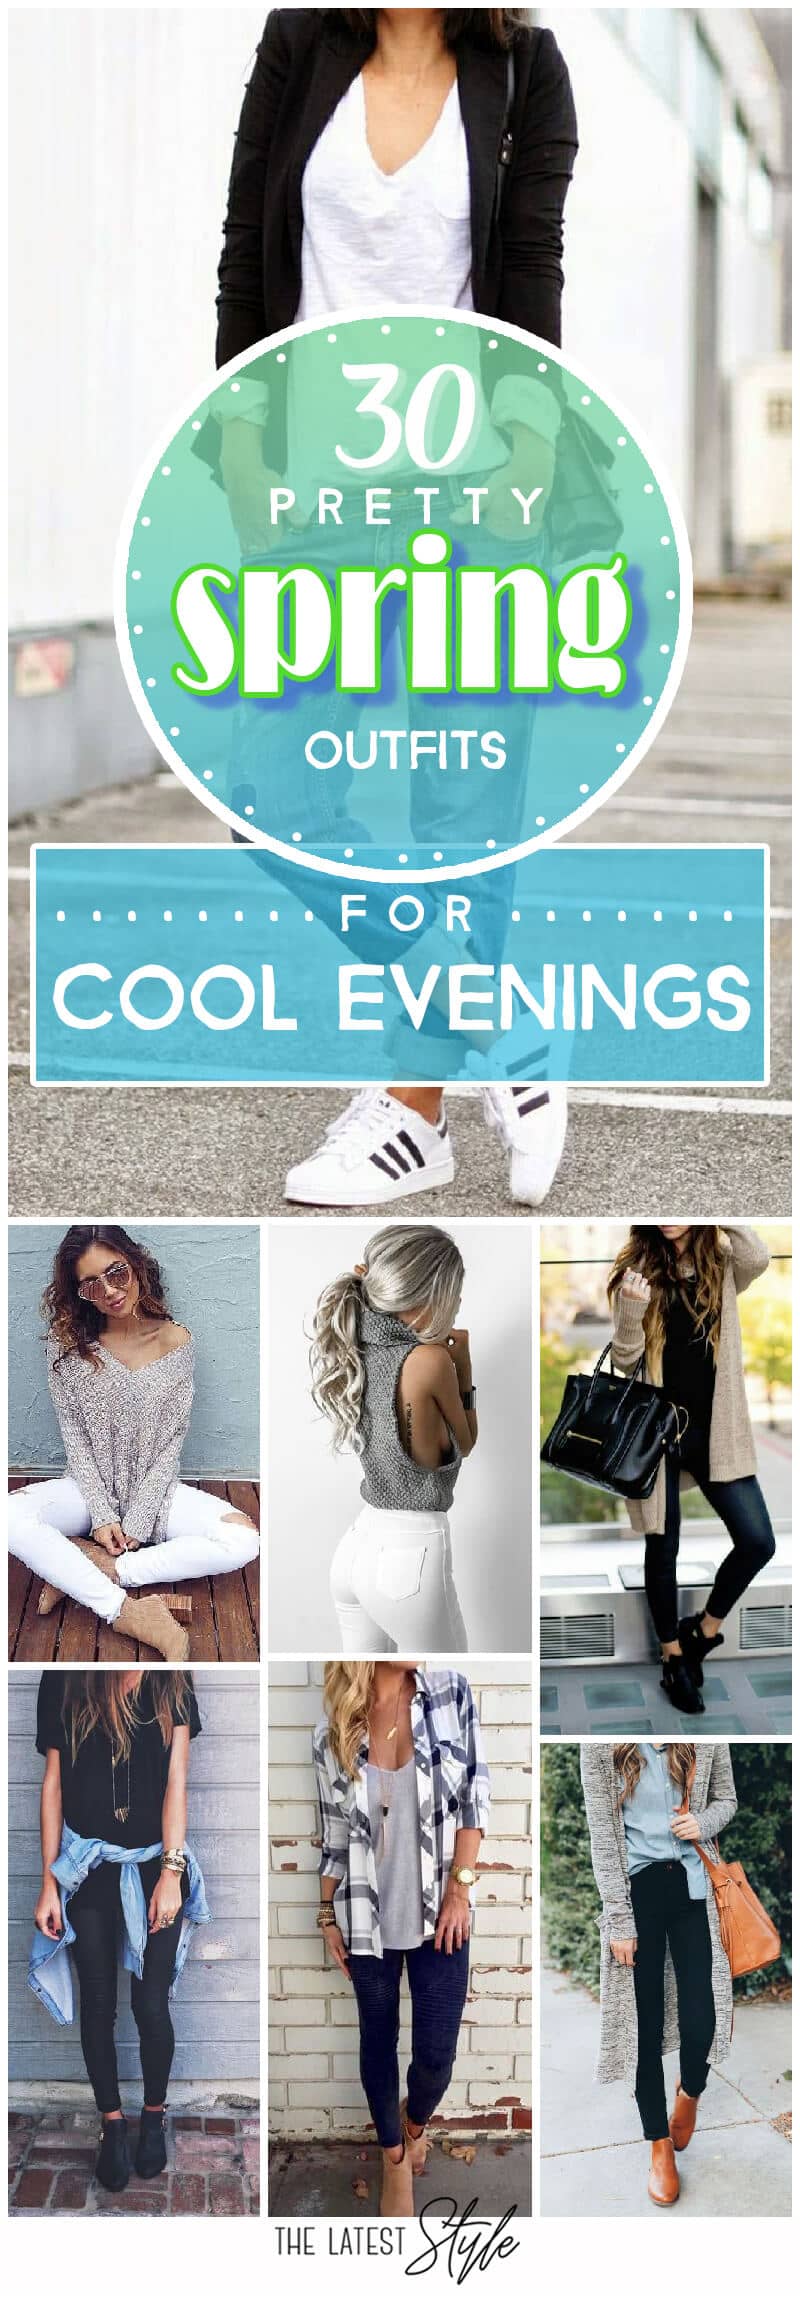 Spring Outfits for Cold Nights